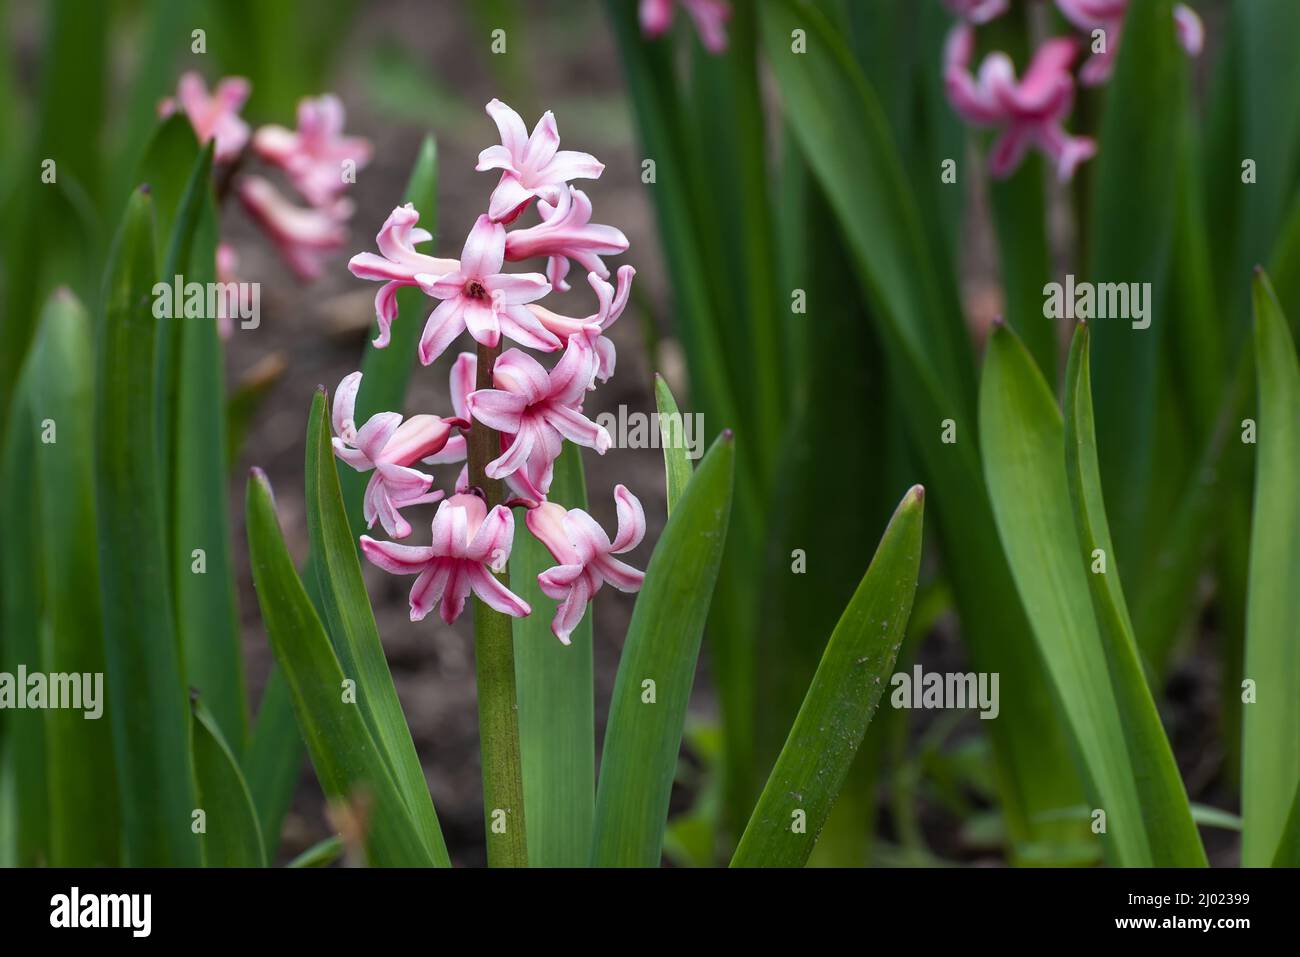 Beautiful pink hyacinth (Hyacinthus) flower with green leaves on a flowerbed in the garden in spring Stock Photo